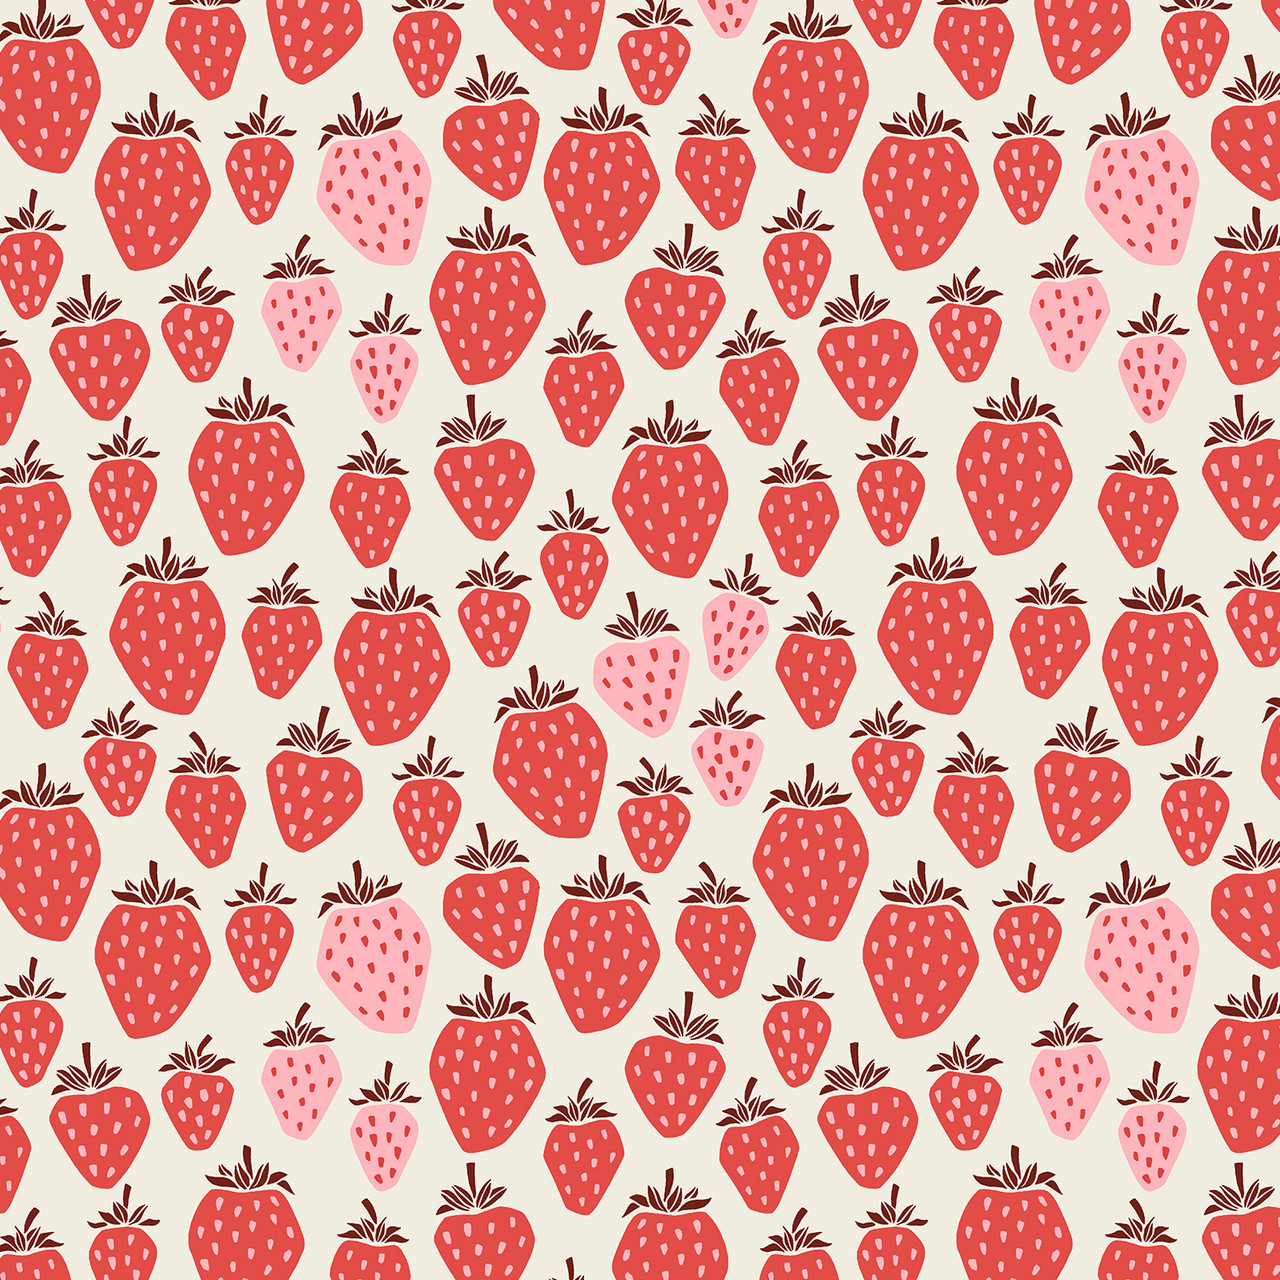 Pink Strawberry Fabric by The Yard Cute Pink Fruit Plants DIY Sewing Craft  Hobby Fabric by The Yard Nature Theme Decorative Fabric for Upholstery and